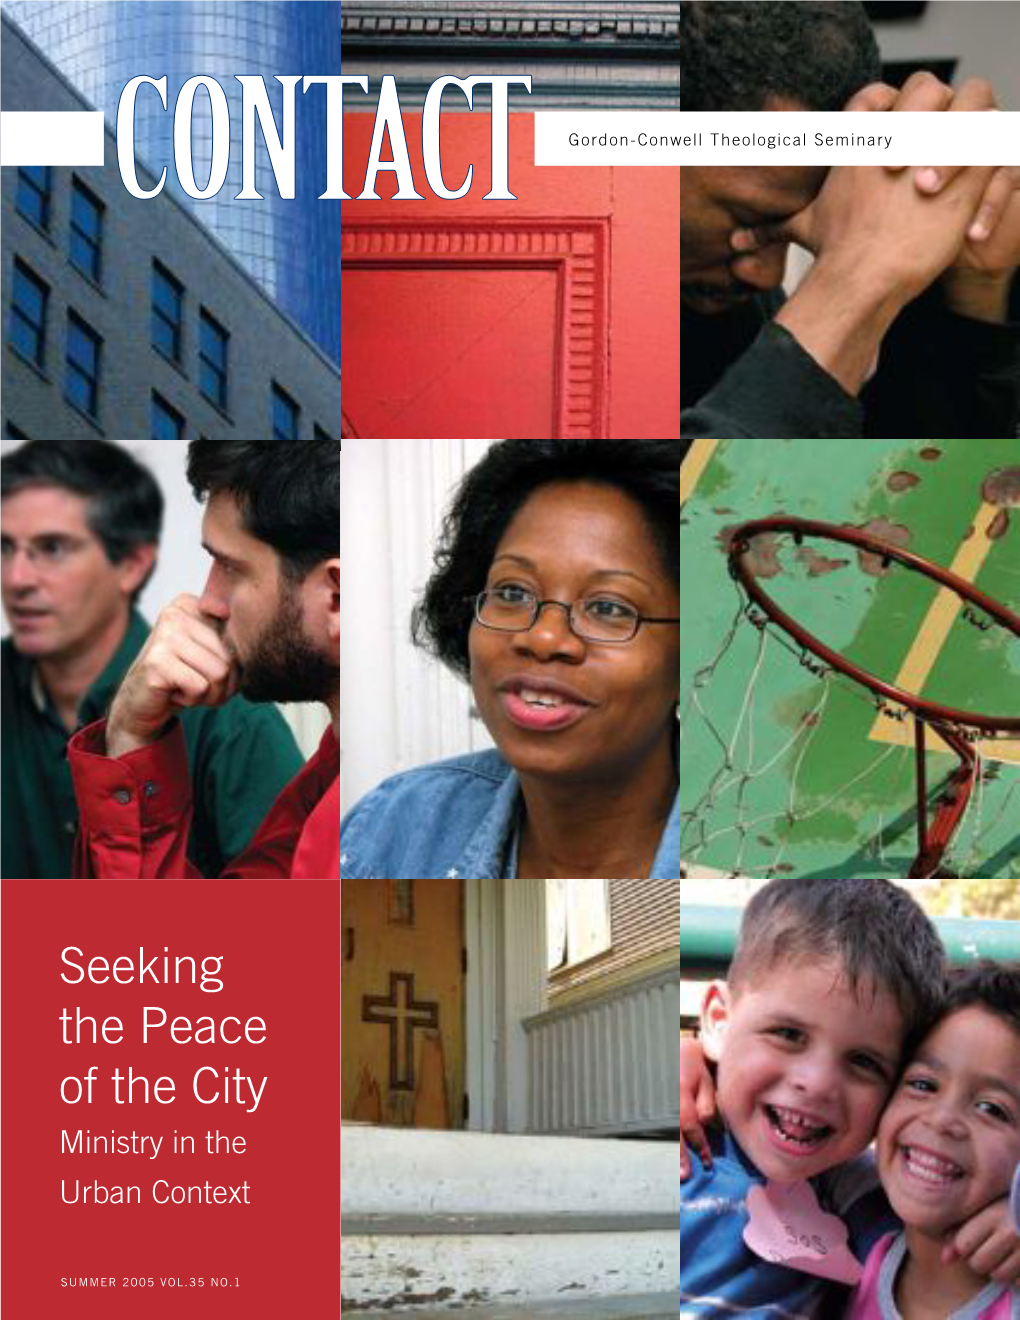 Seeking the Peace of the City Ministry in the Urban Context